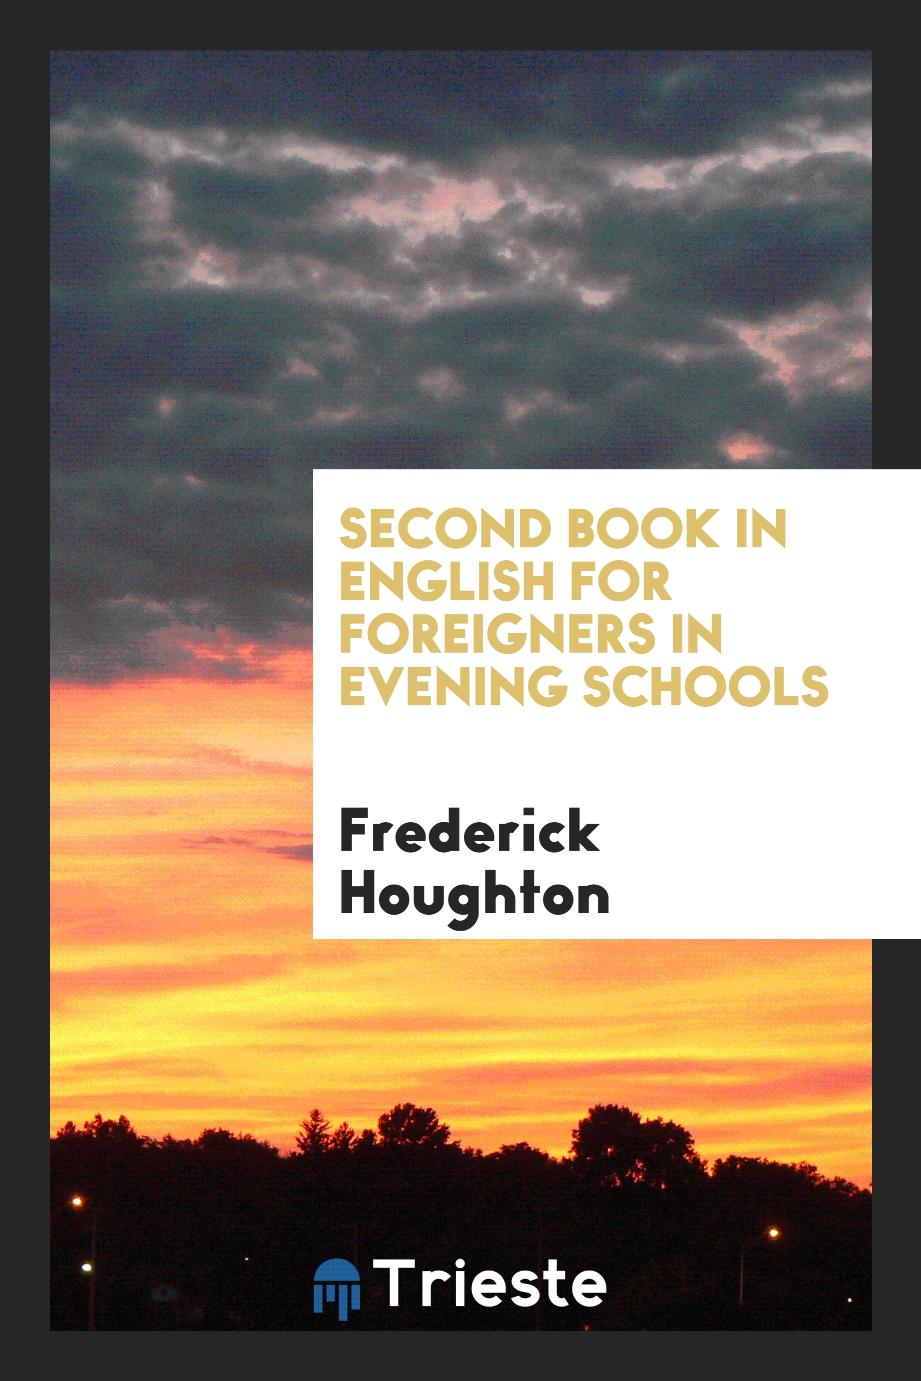 Second Book in English for Foreigners in Evening Schools